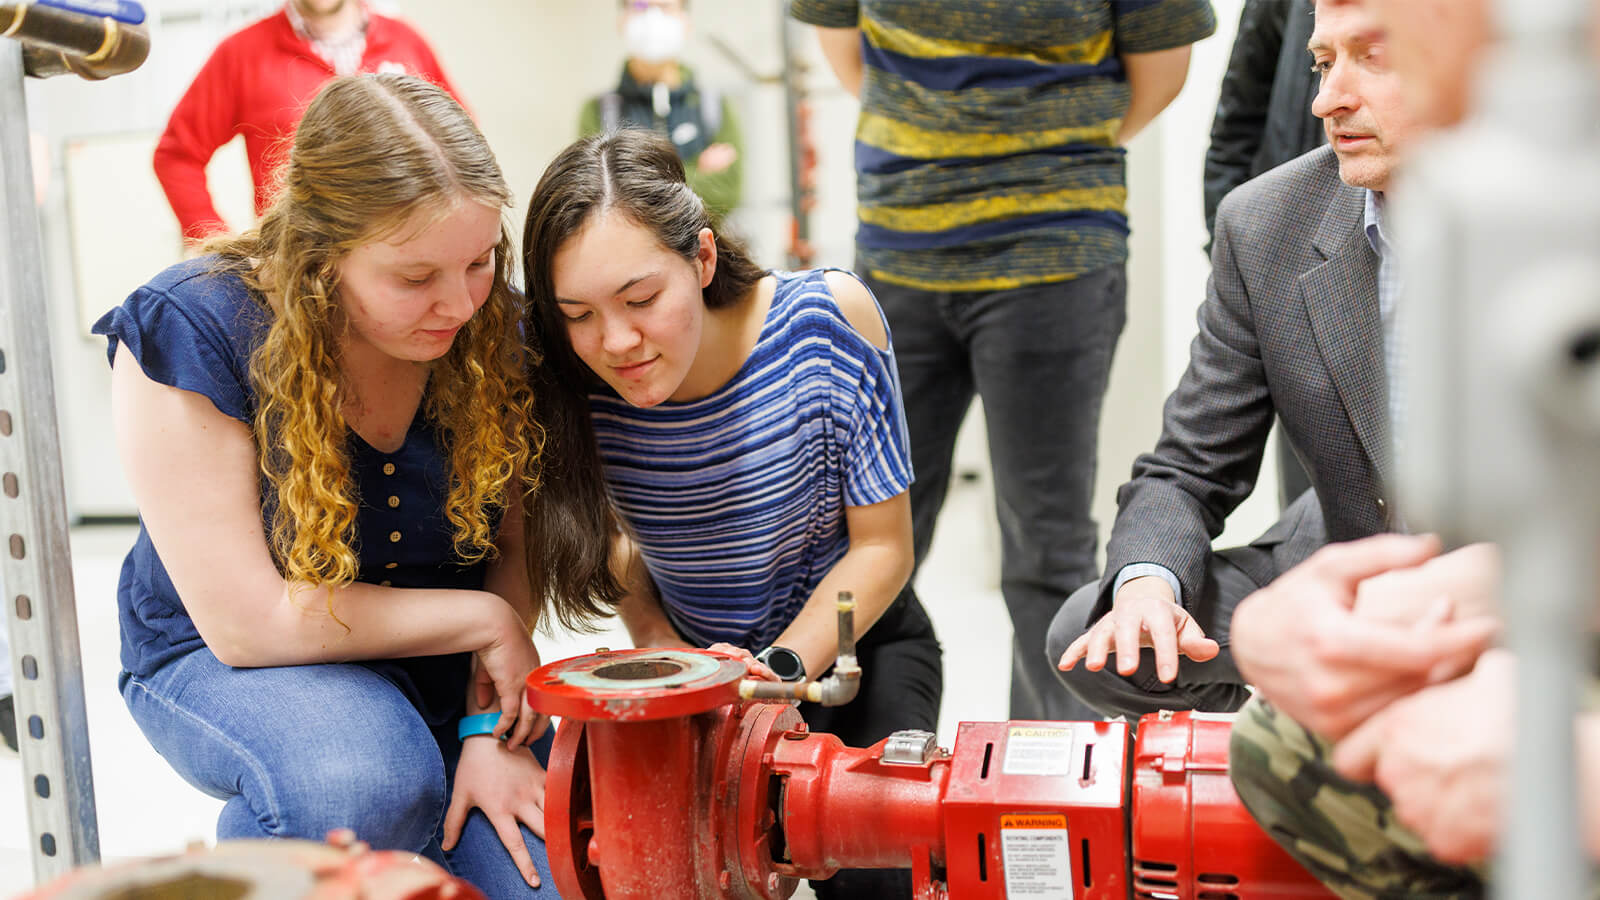 Students examine large release valve on pipe